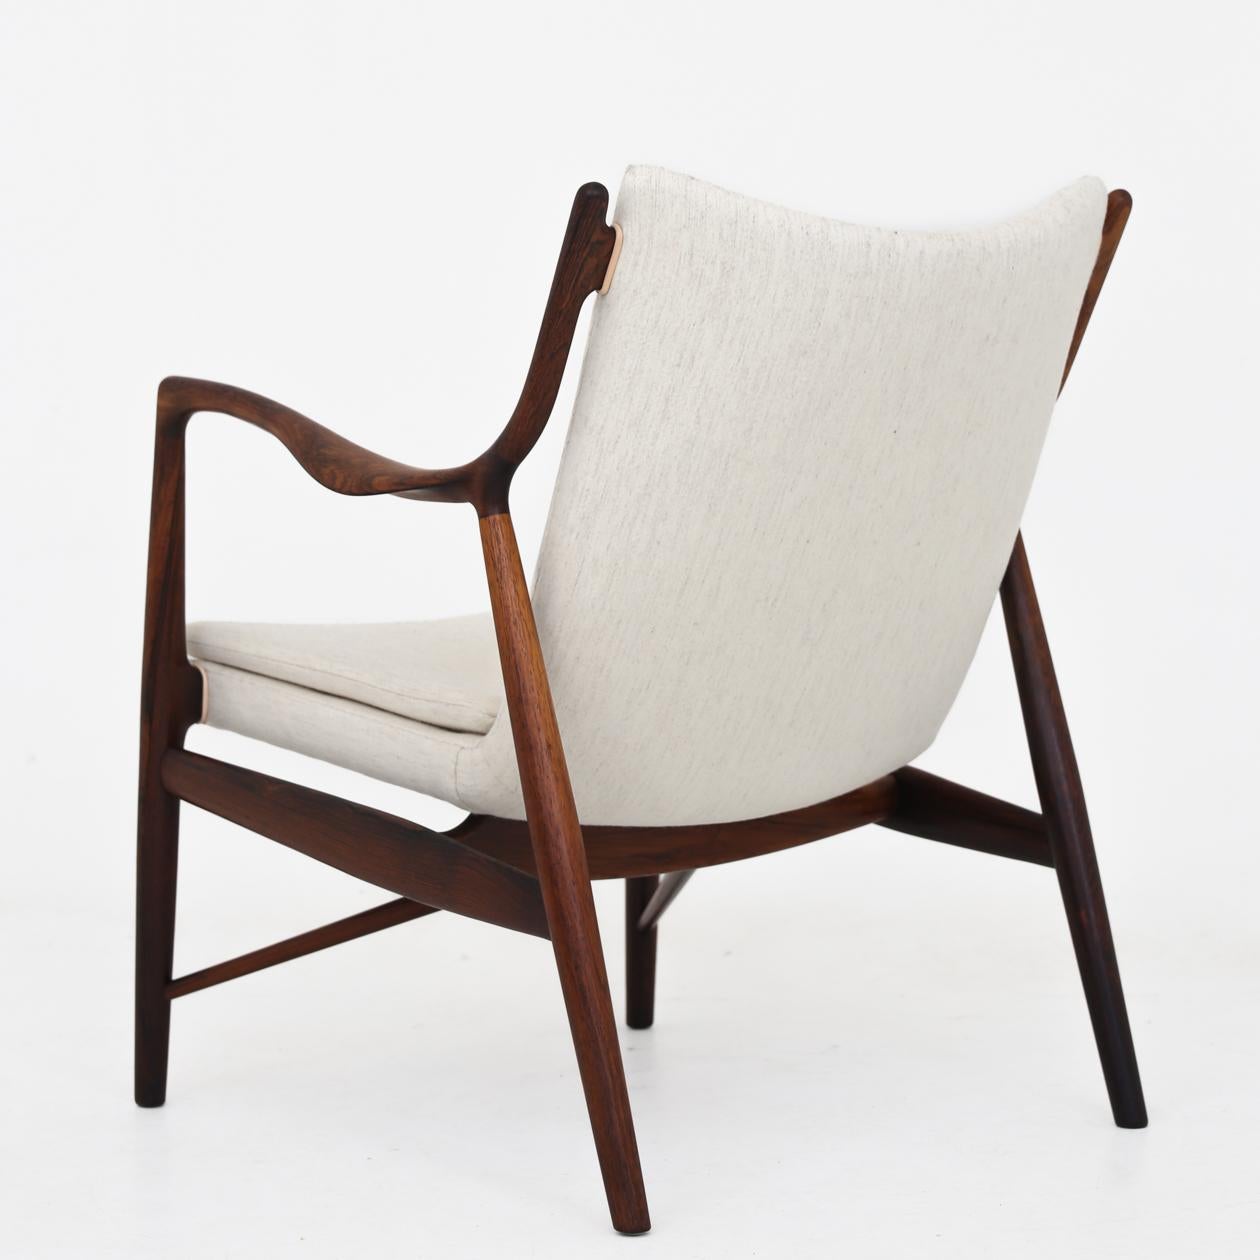 Model NV 45 - Rare easy chair in Rio rosewood (Brazilian rosewood) and new, light 'Savak' wool with natural leather finishes. Stamped from the workshop. First exhibited at the Cabinetmakers' Guild Furniture Exhibition in 1945. Finn Juhl / Niels